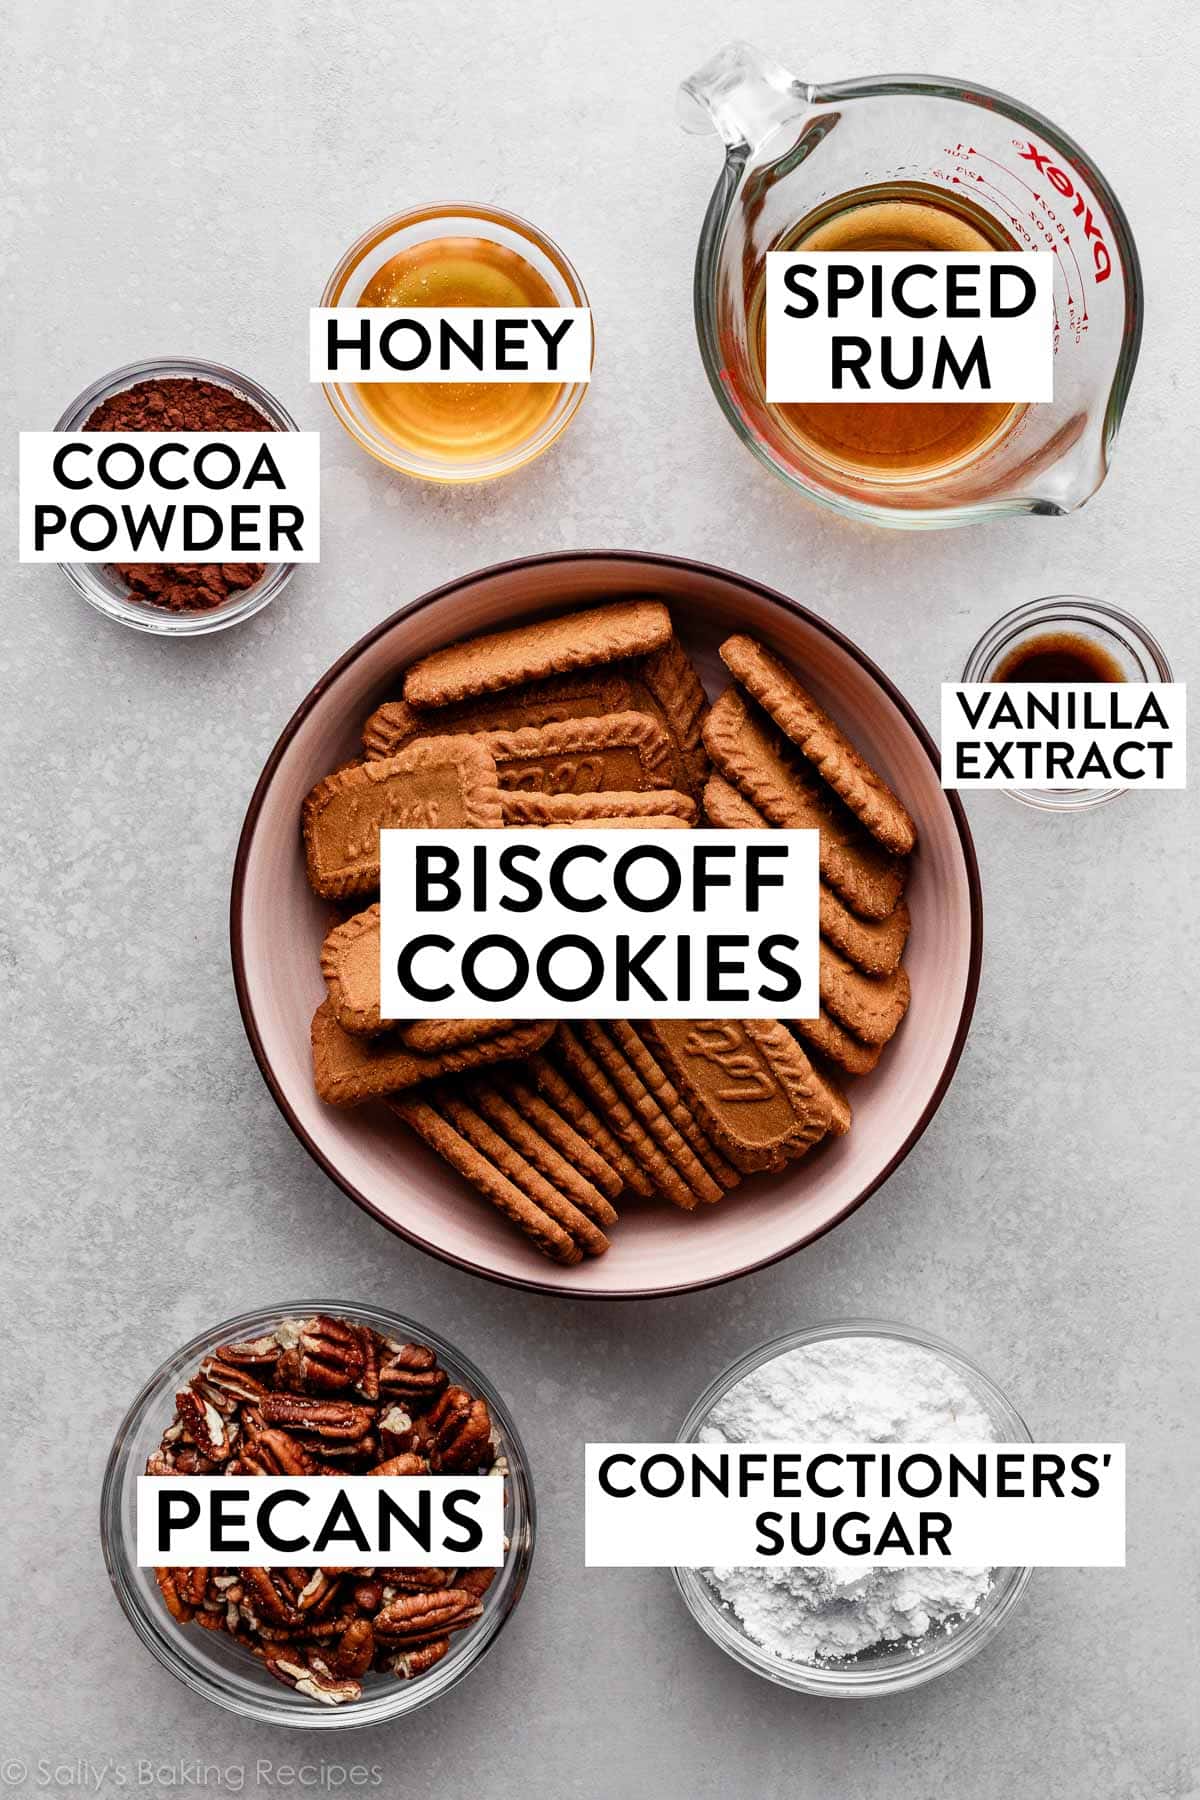 bowls of measured ingredients including Biscoff biscuit cookies, spiced rum, pecans, confectioners' sugar, and cocoa powder.